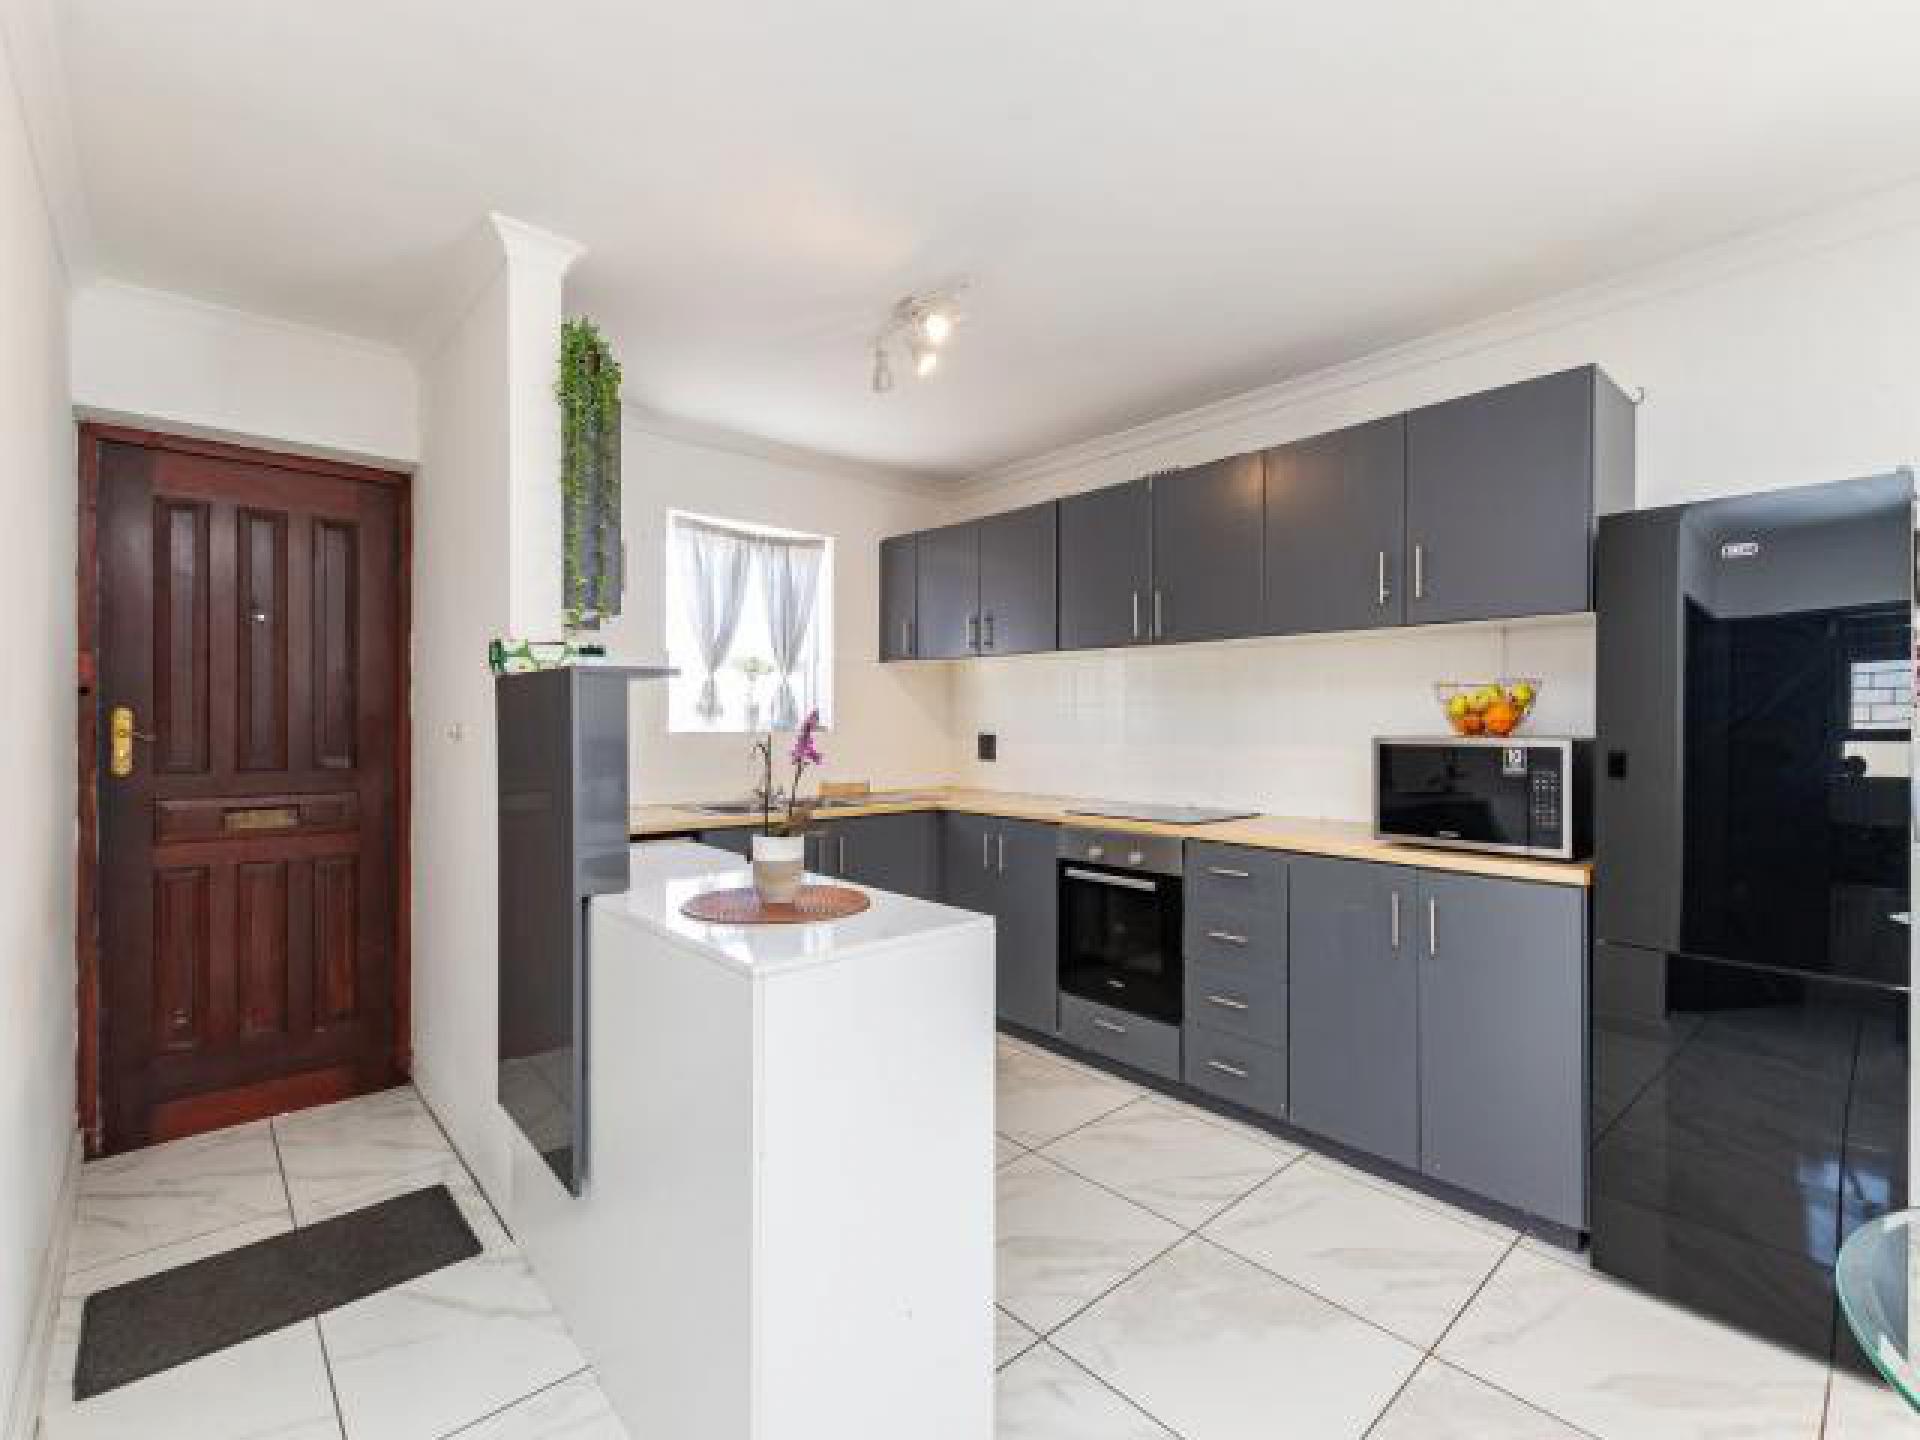 Kitchen of property in Faerie Knowe